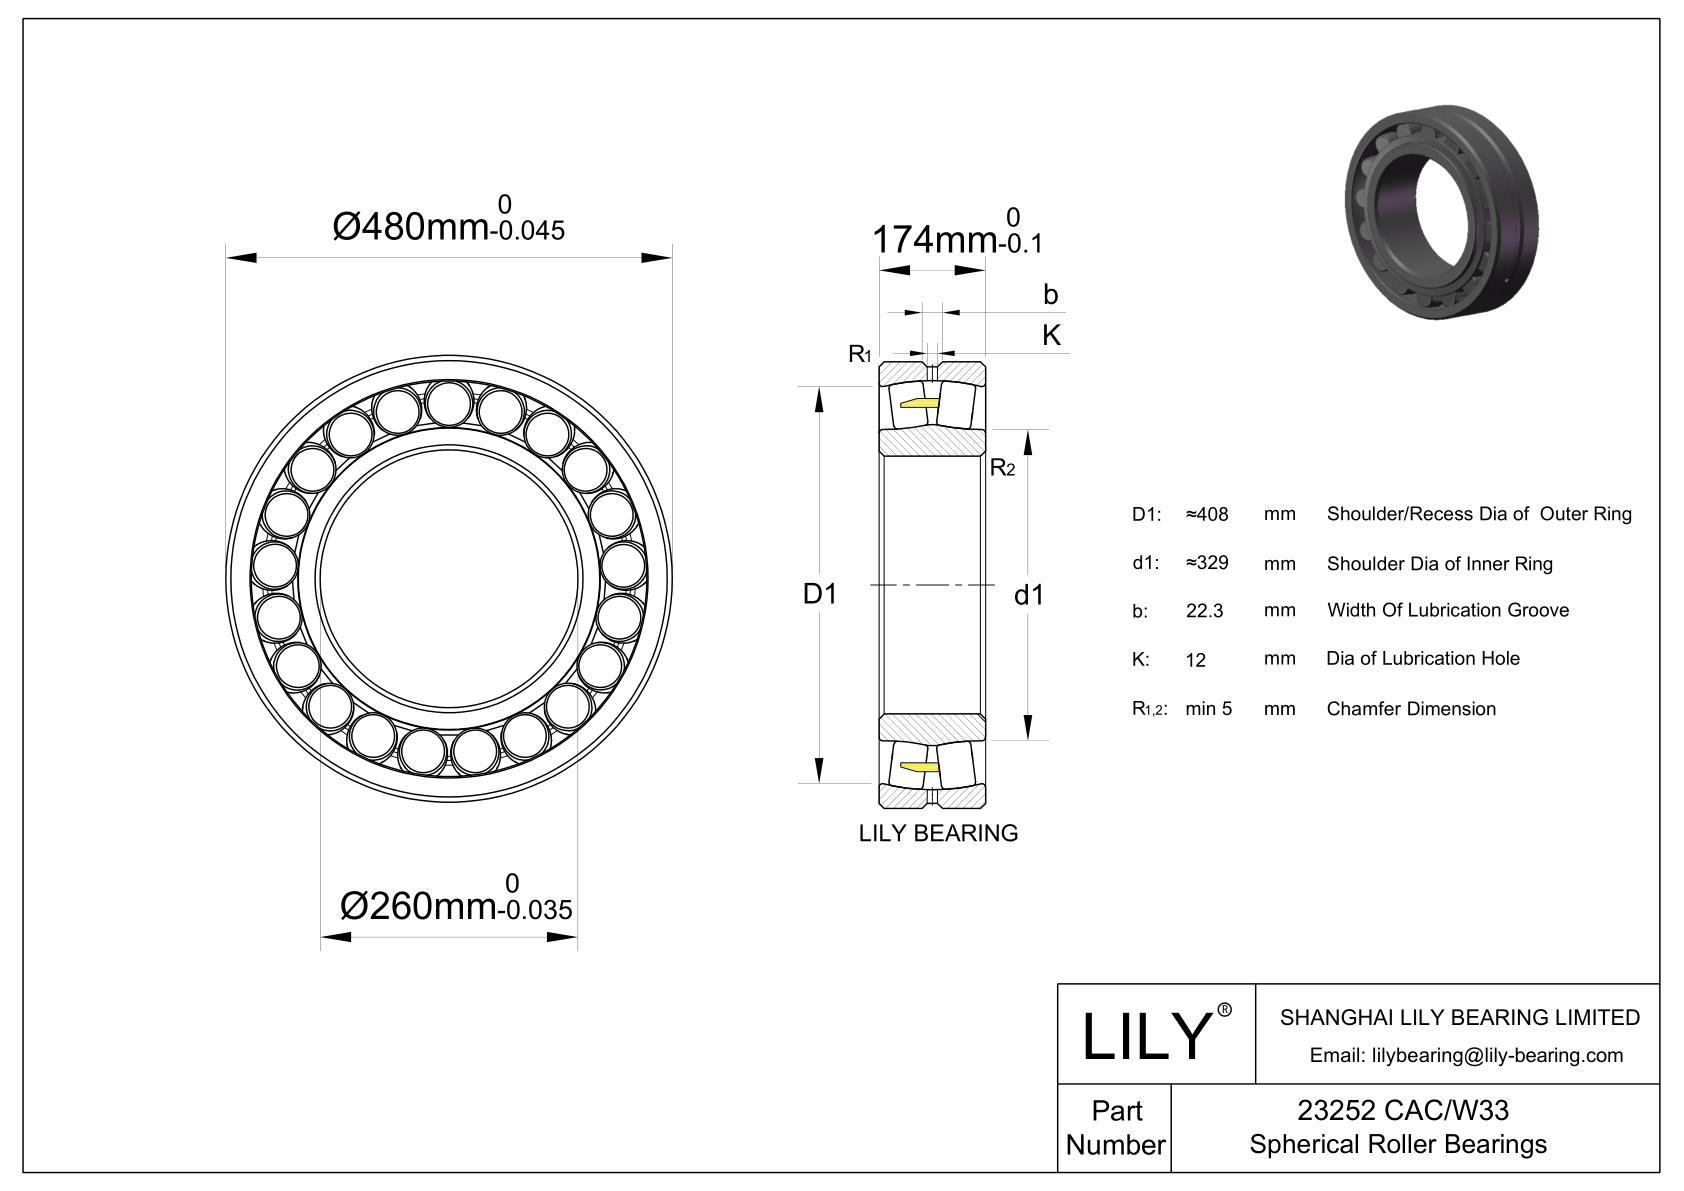 23252 CAC/W33 Double Row Spherical Roller Bearing cad drawing